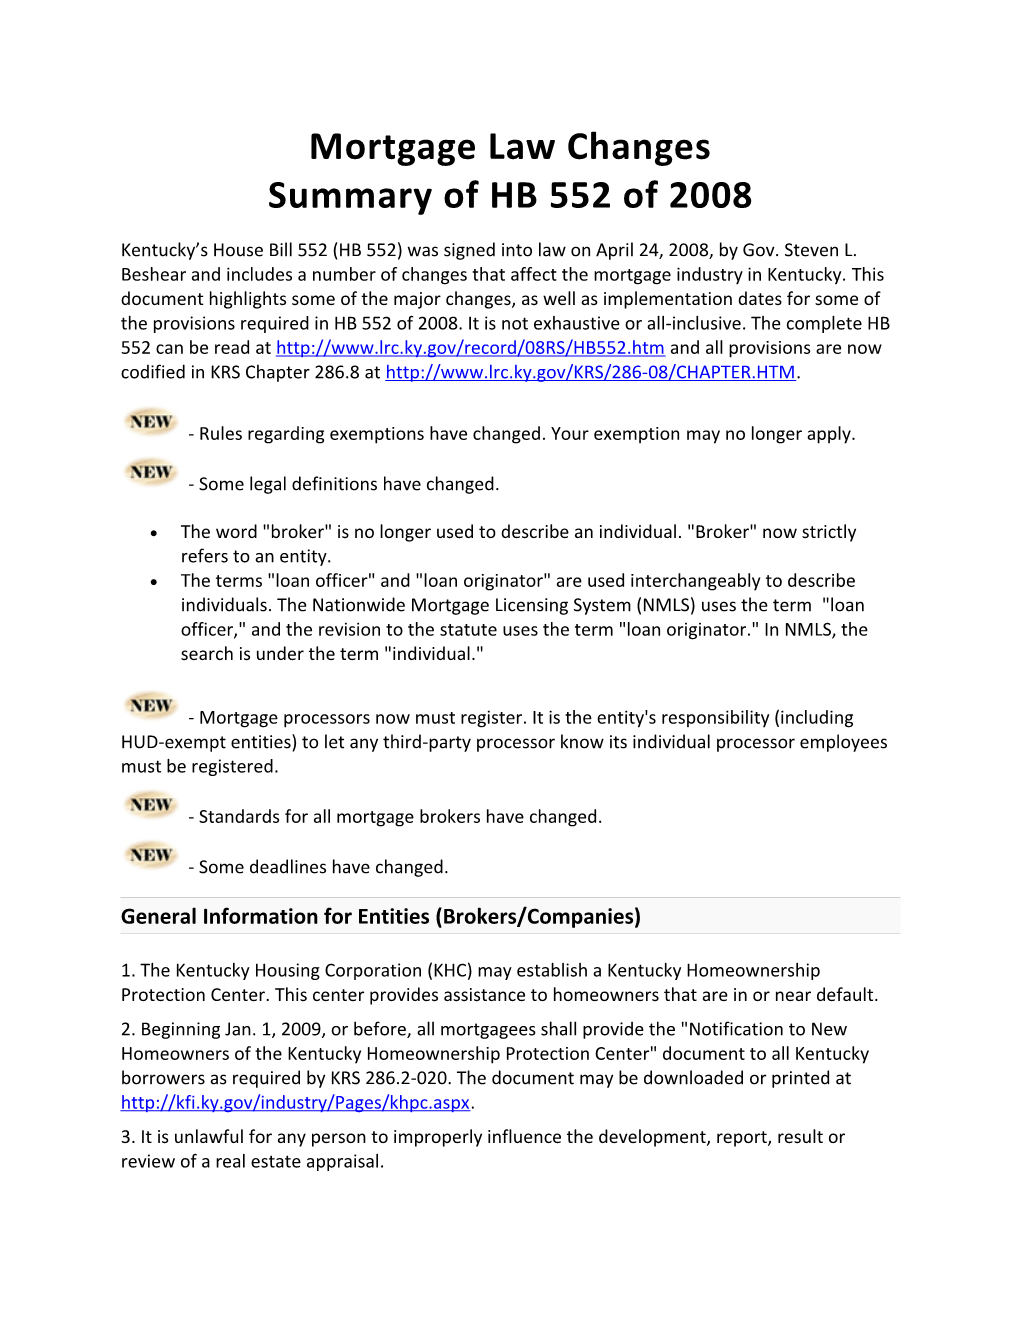 Mortgage Law Changes - HB 552 of 2008